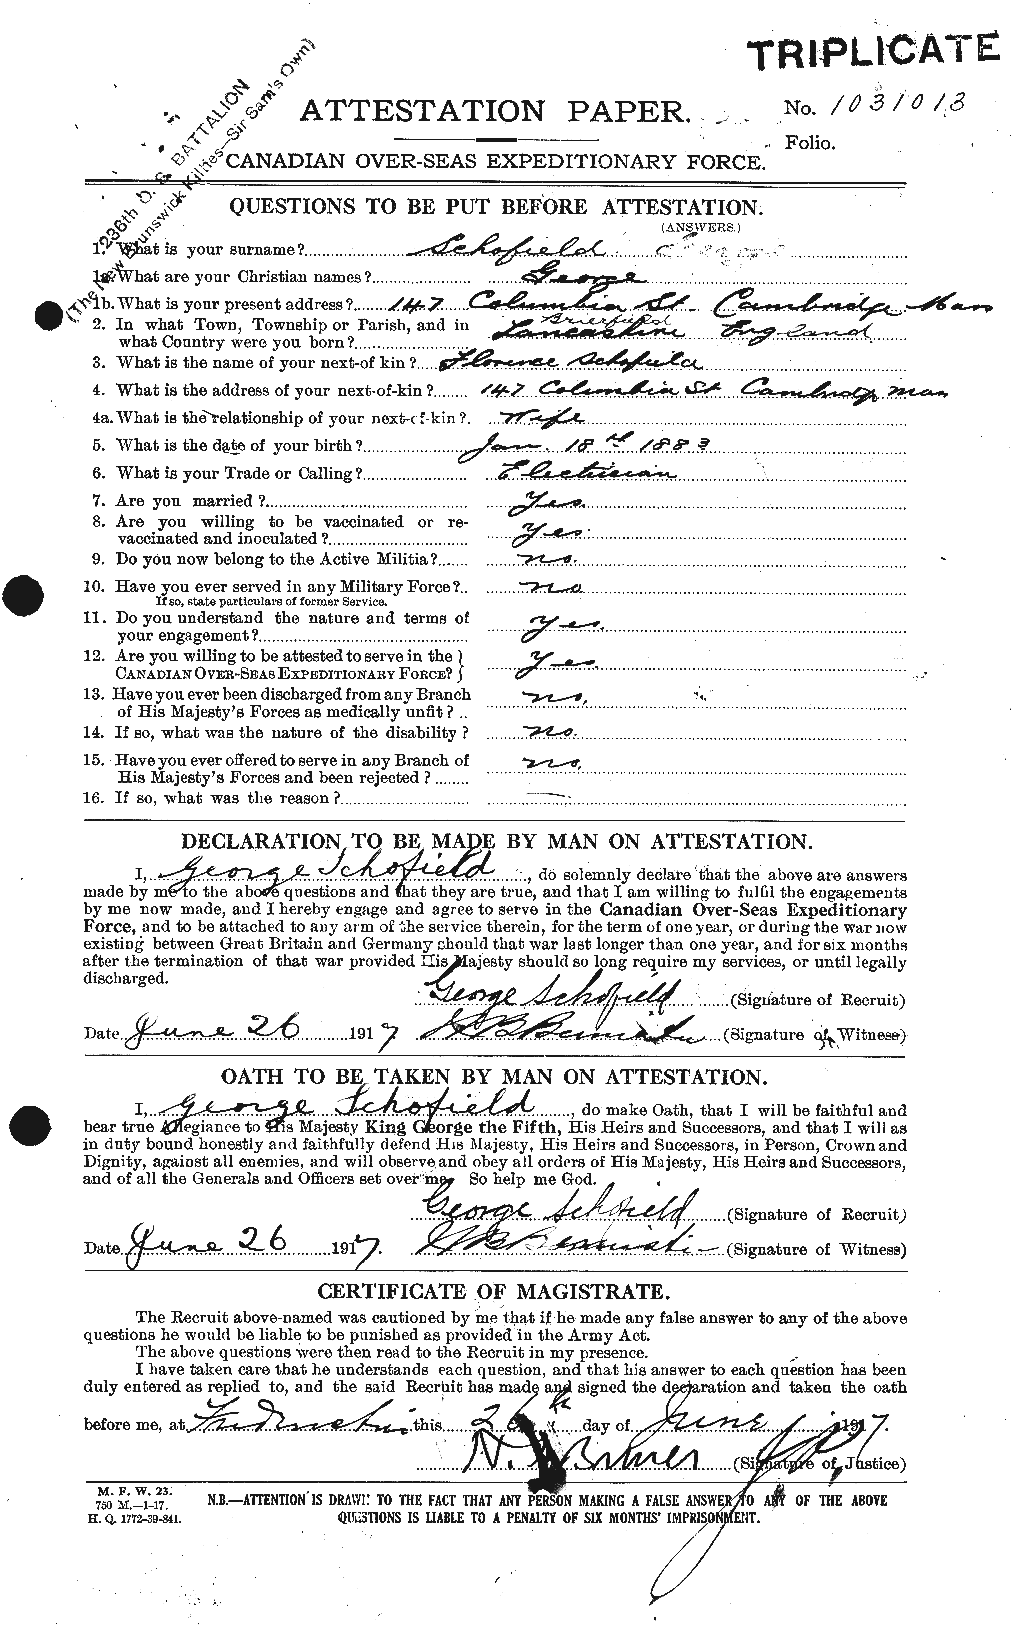 Personnel Records of the First World War - CEF 082197a